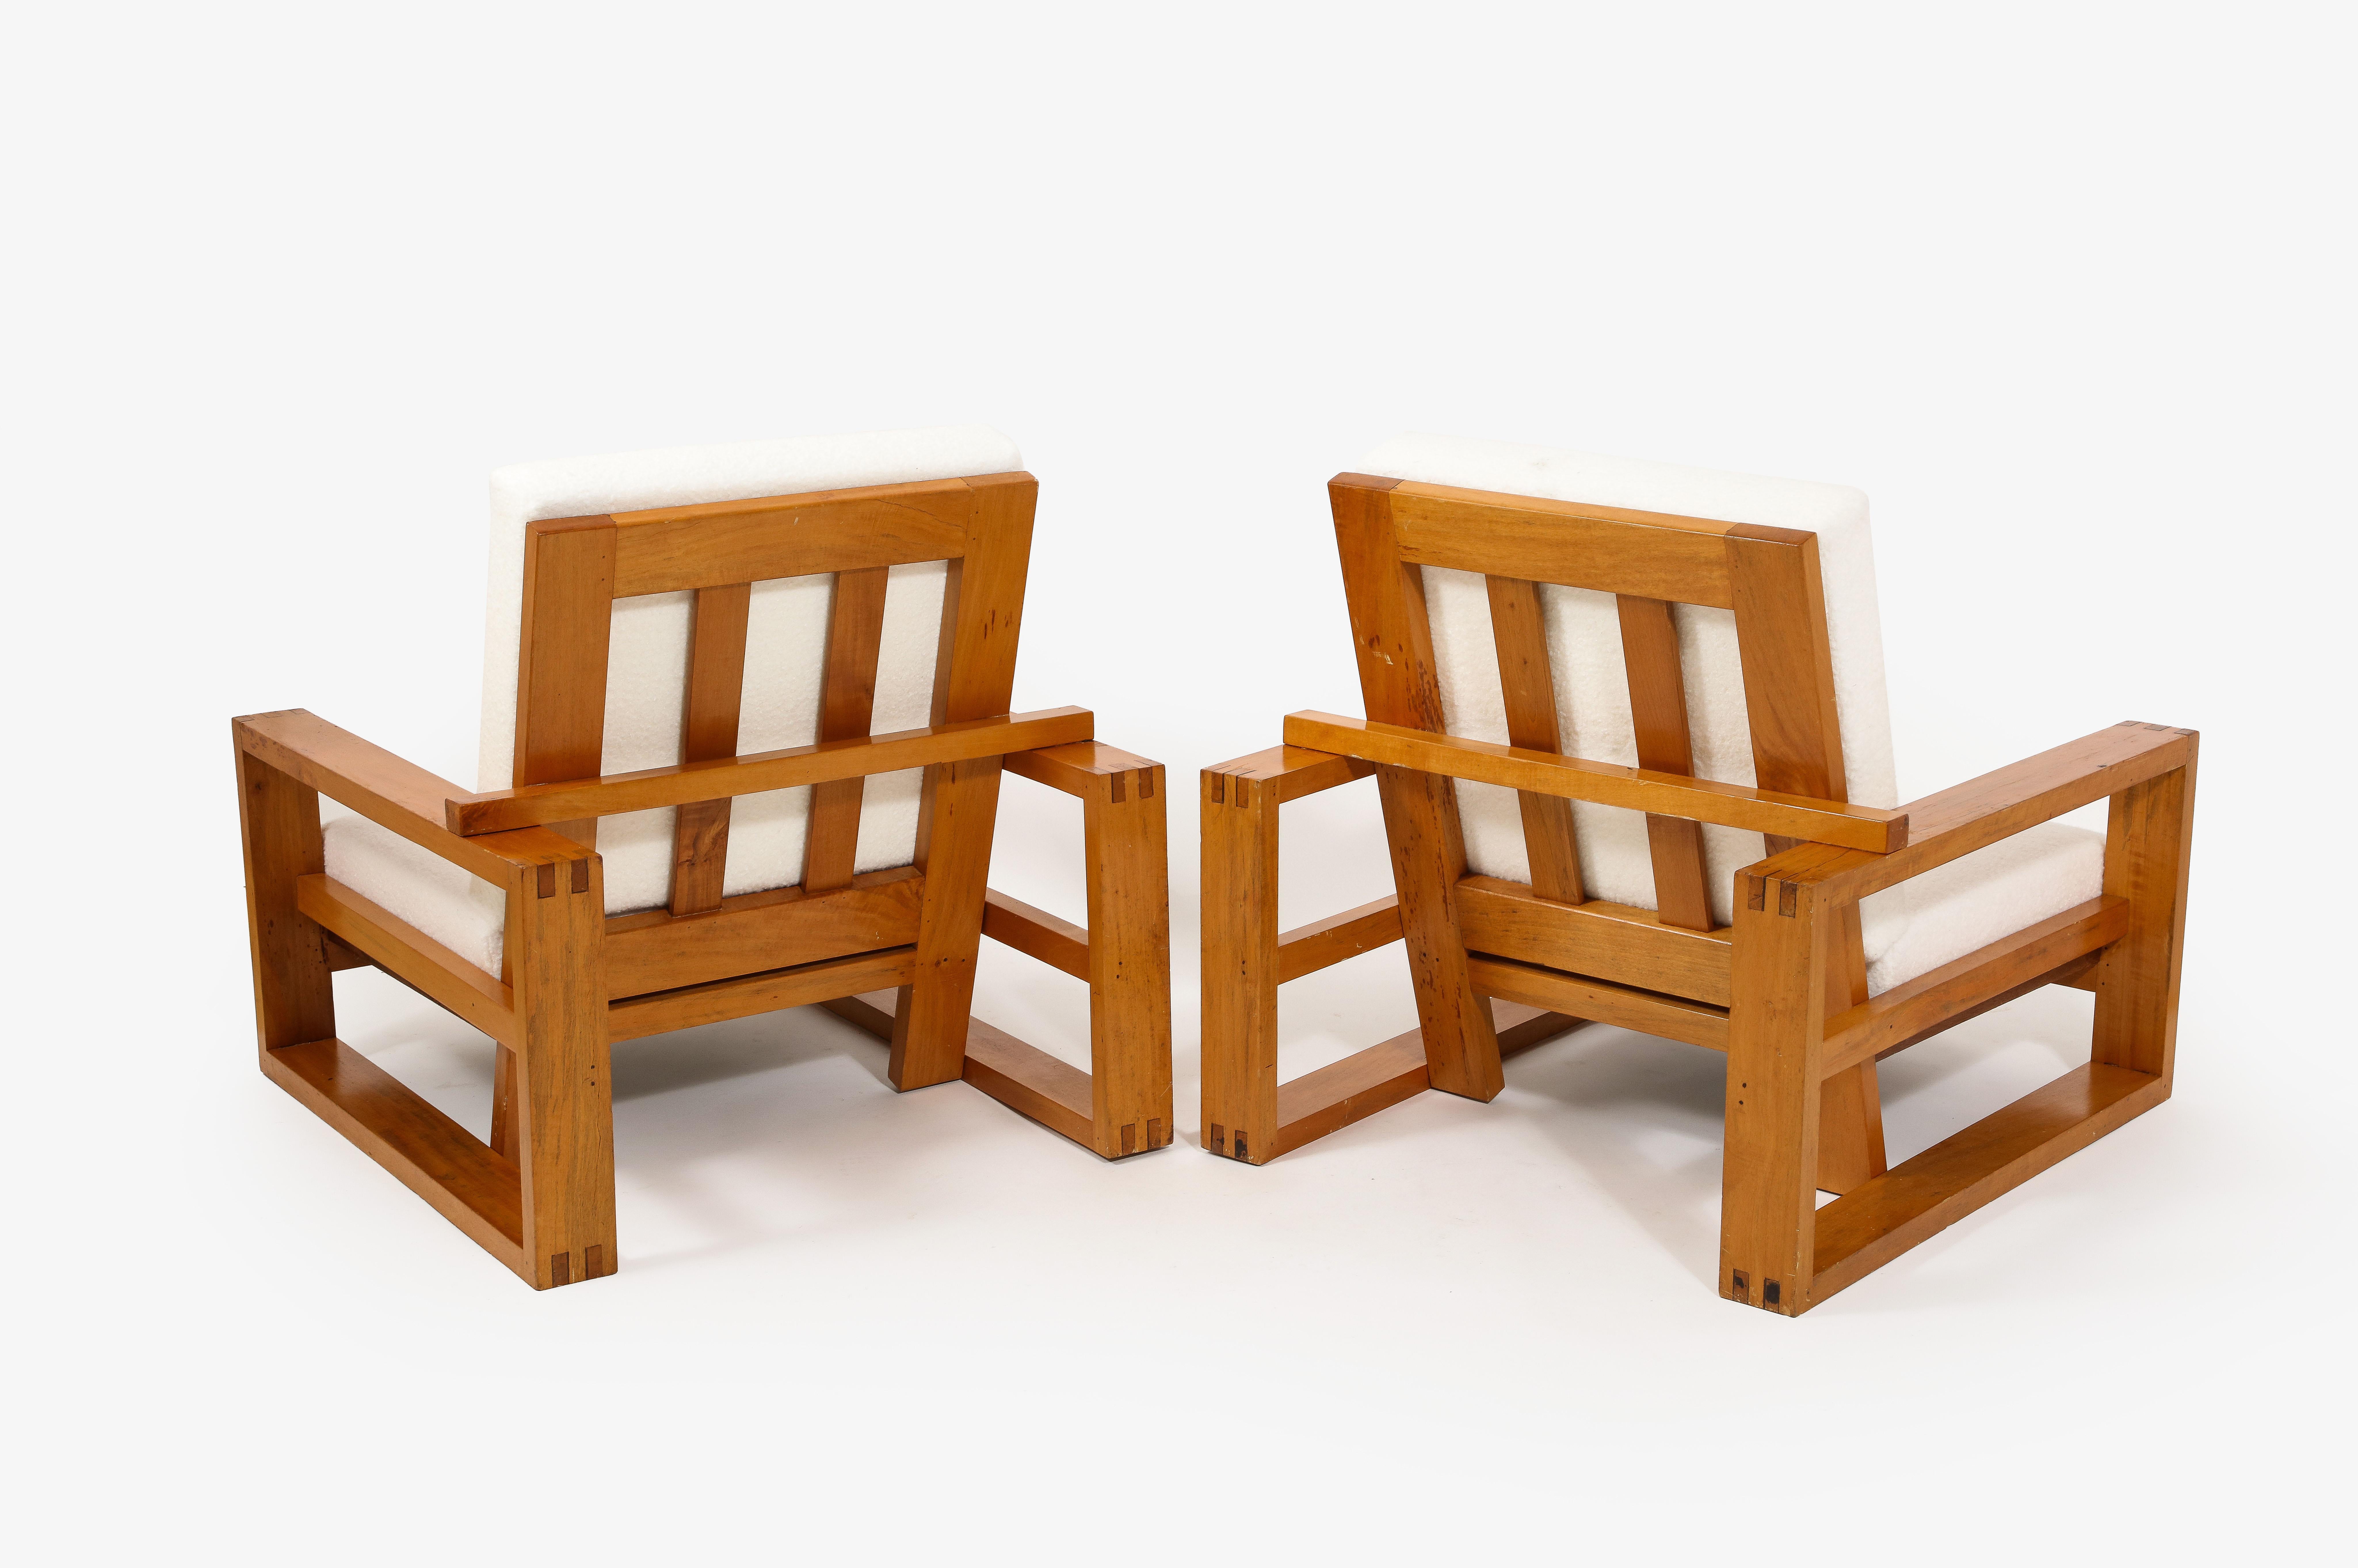 20th Century Maison Regain Large Pair of Lounge Chairs, France 1960's For Sale